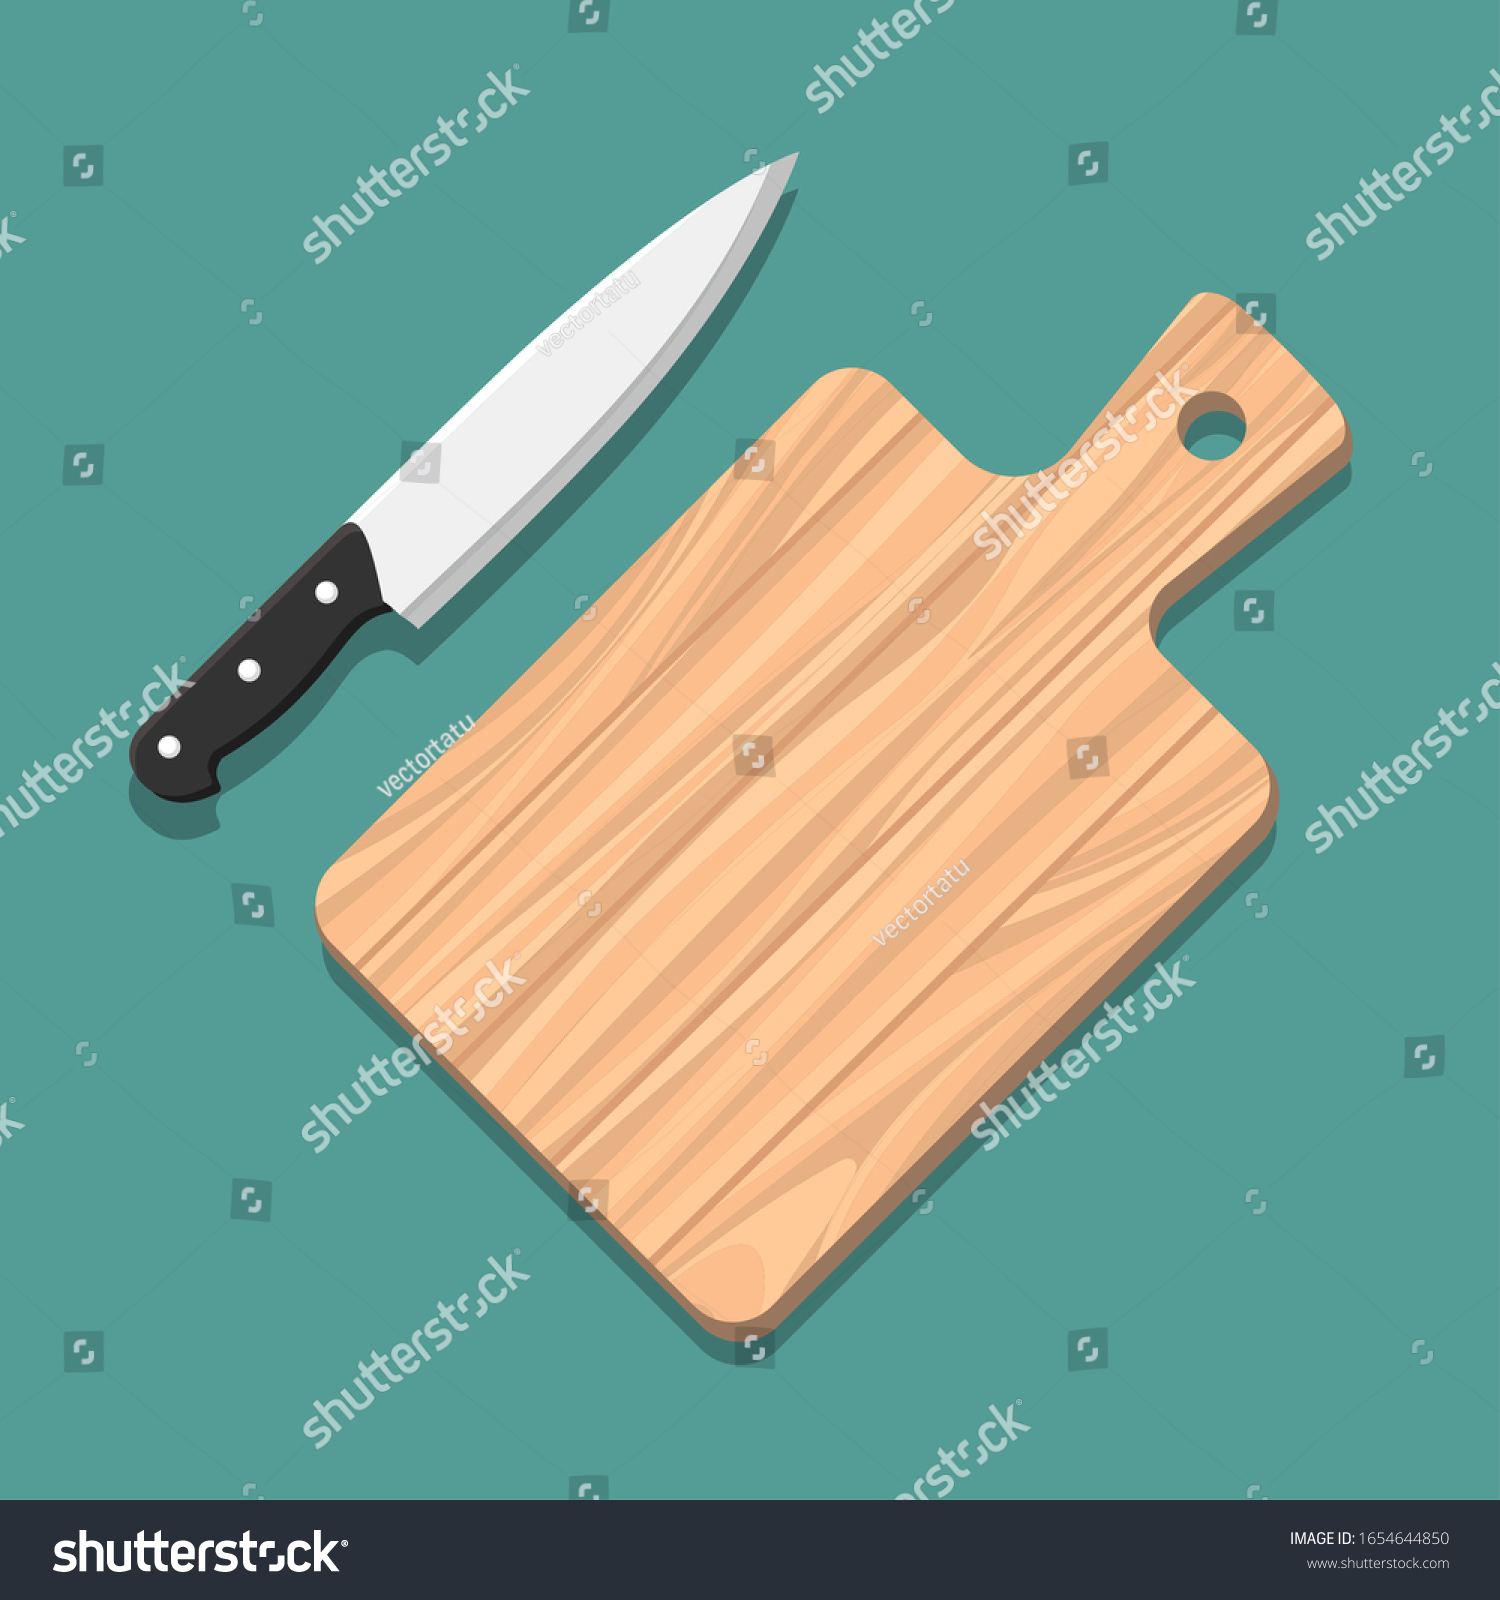 SVG of Knife and cutting board. Kitchen wooden chopping board and cutting chef knife drawing cartoon vector illustration svg